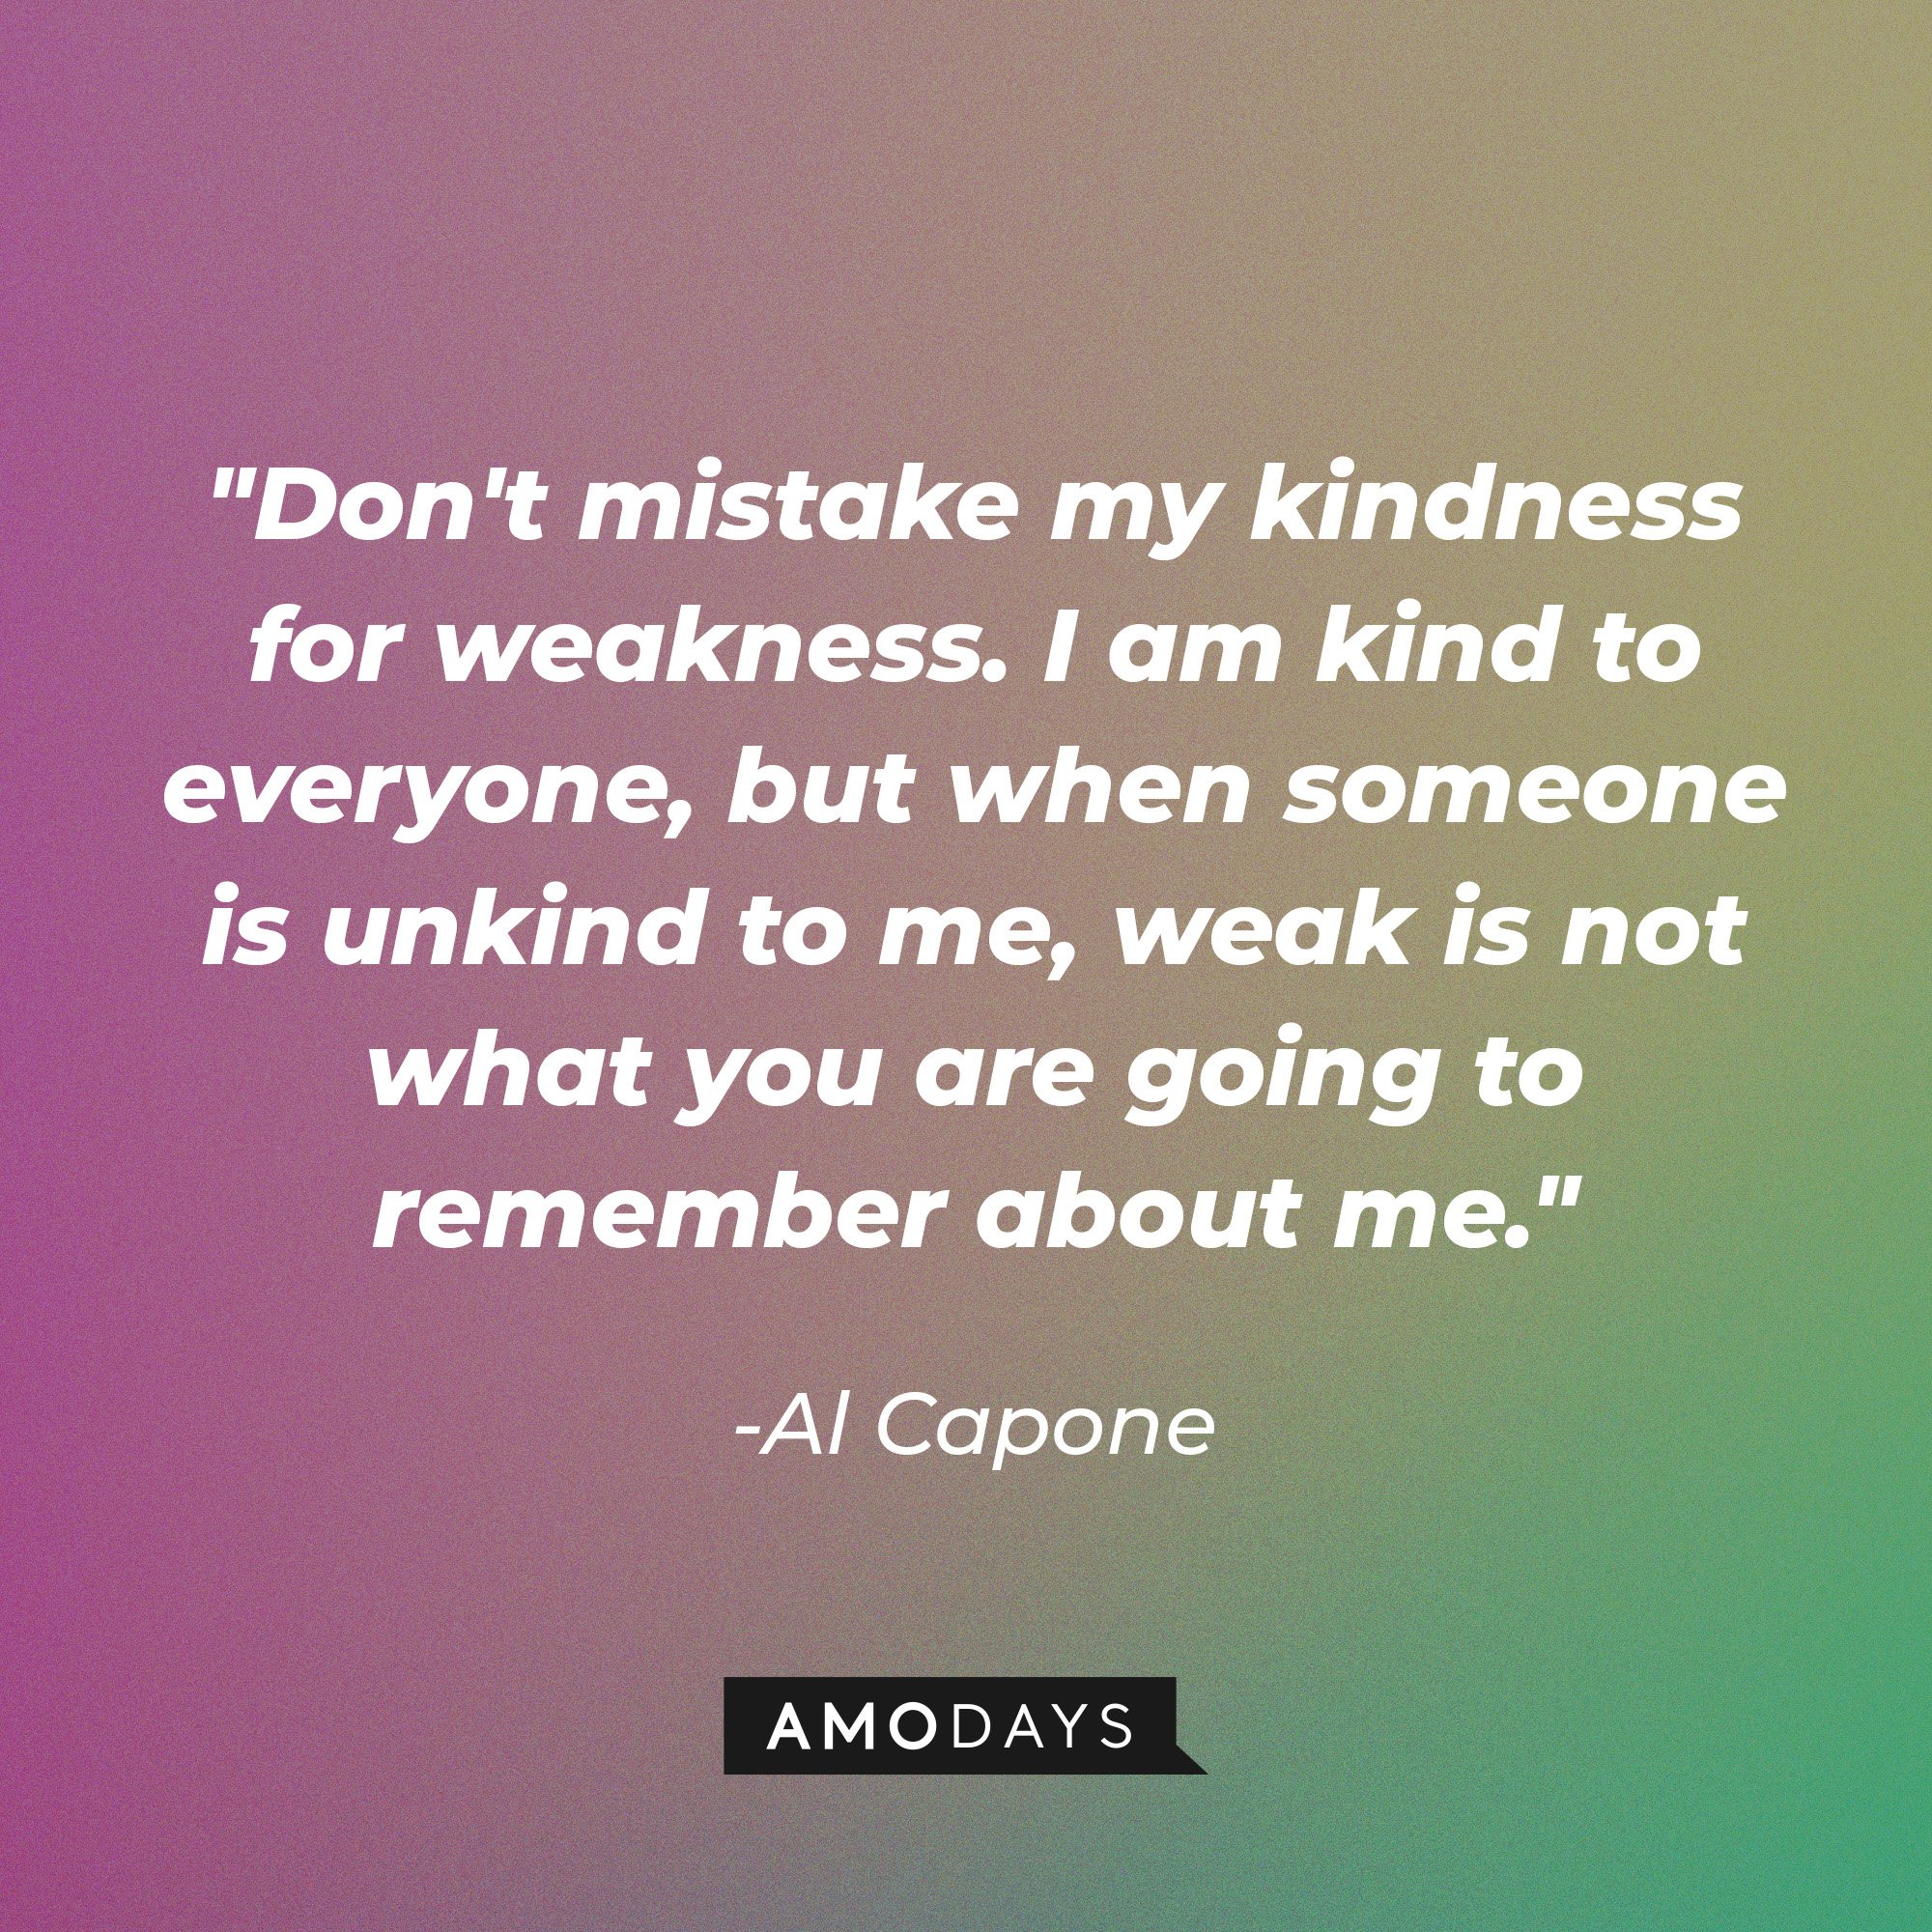 Al Capone’s quote: "Don't mistake my kindness for weakness. I am kind to everyone, but when someone is unkind to me, weak is not what you are going to remember about me." | Image: AmoDays